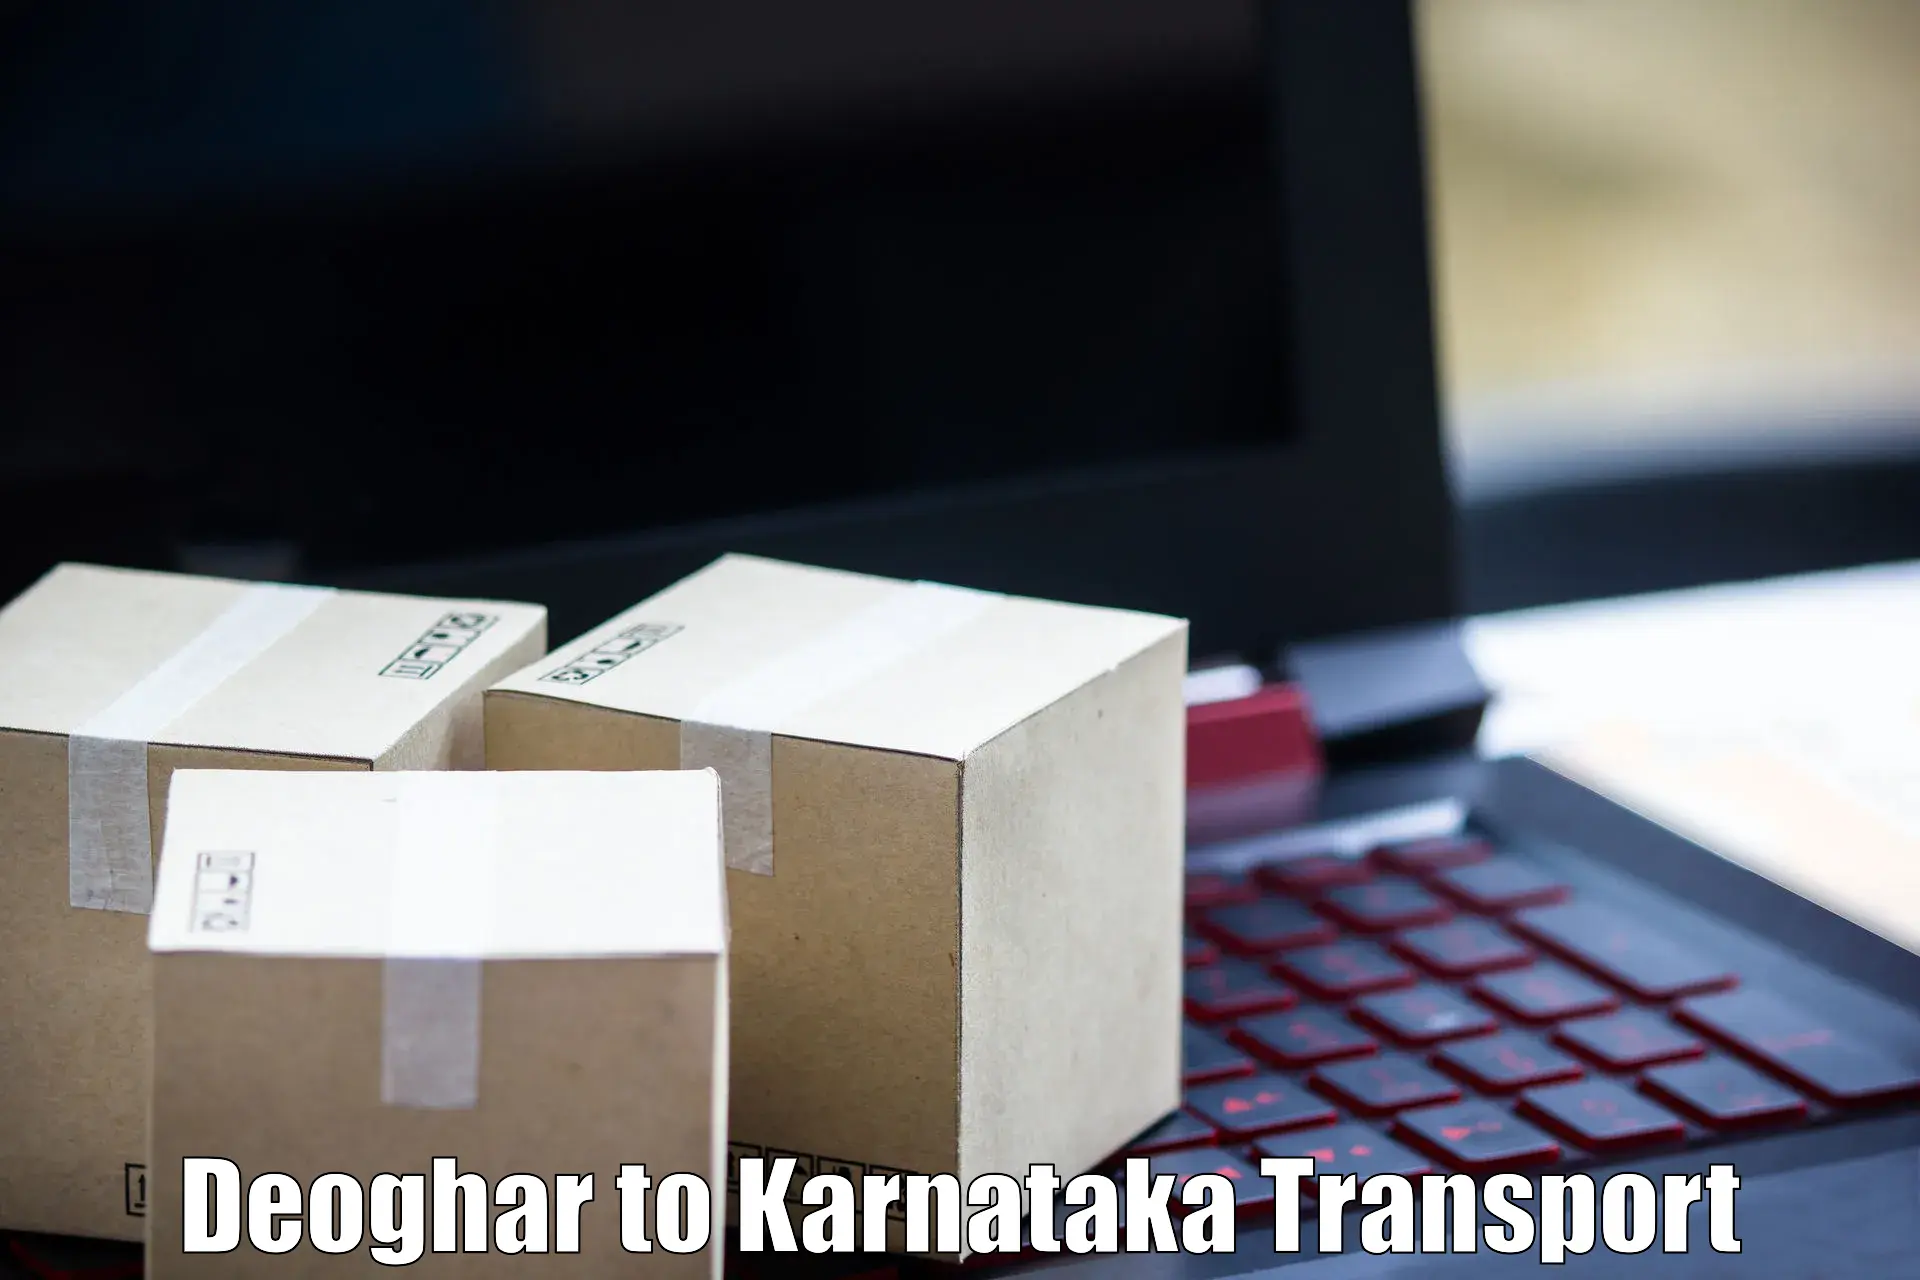 Truck transport companies in India Deoghar to Maddur